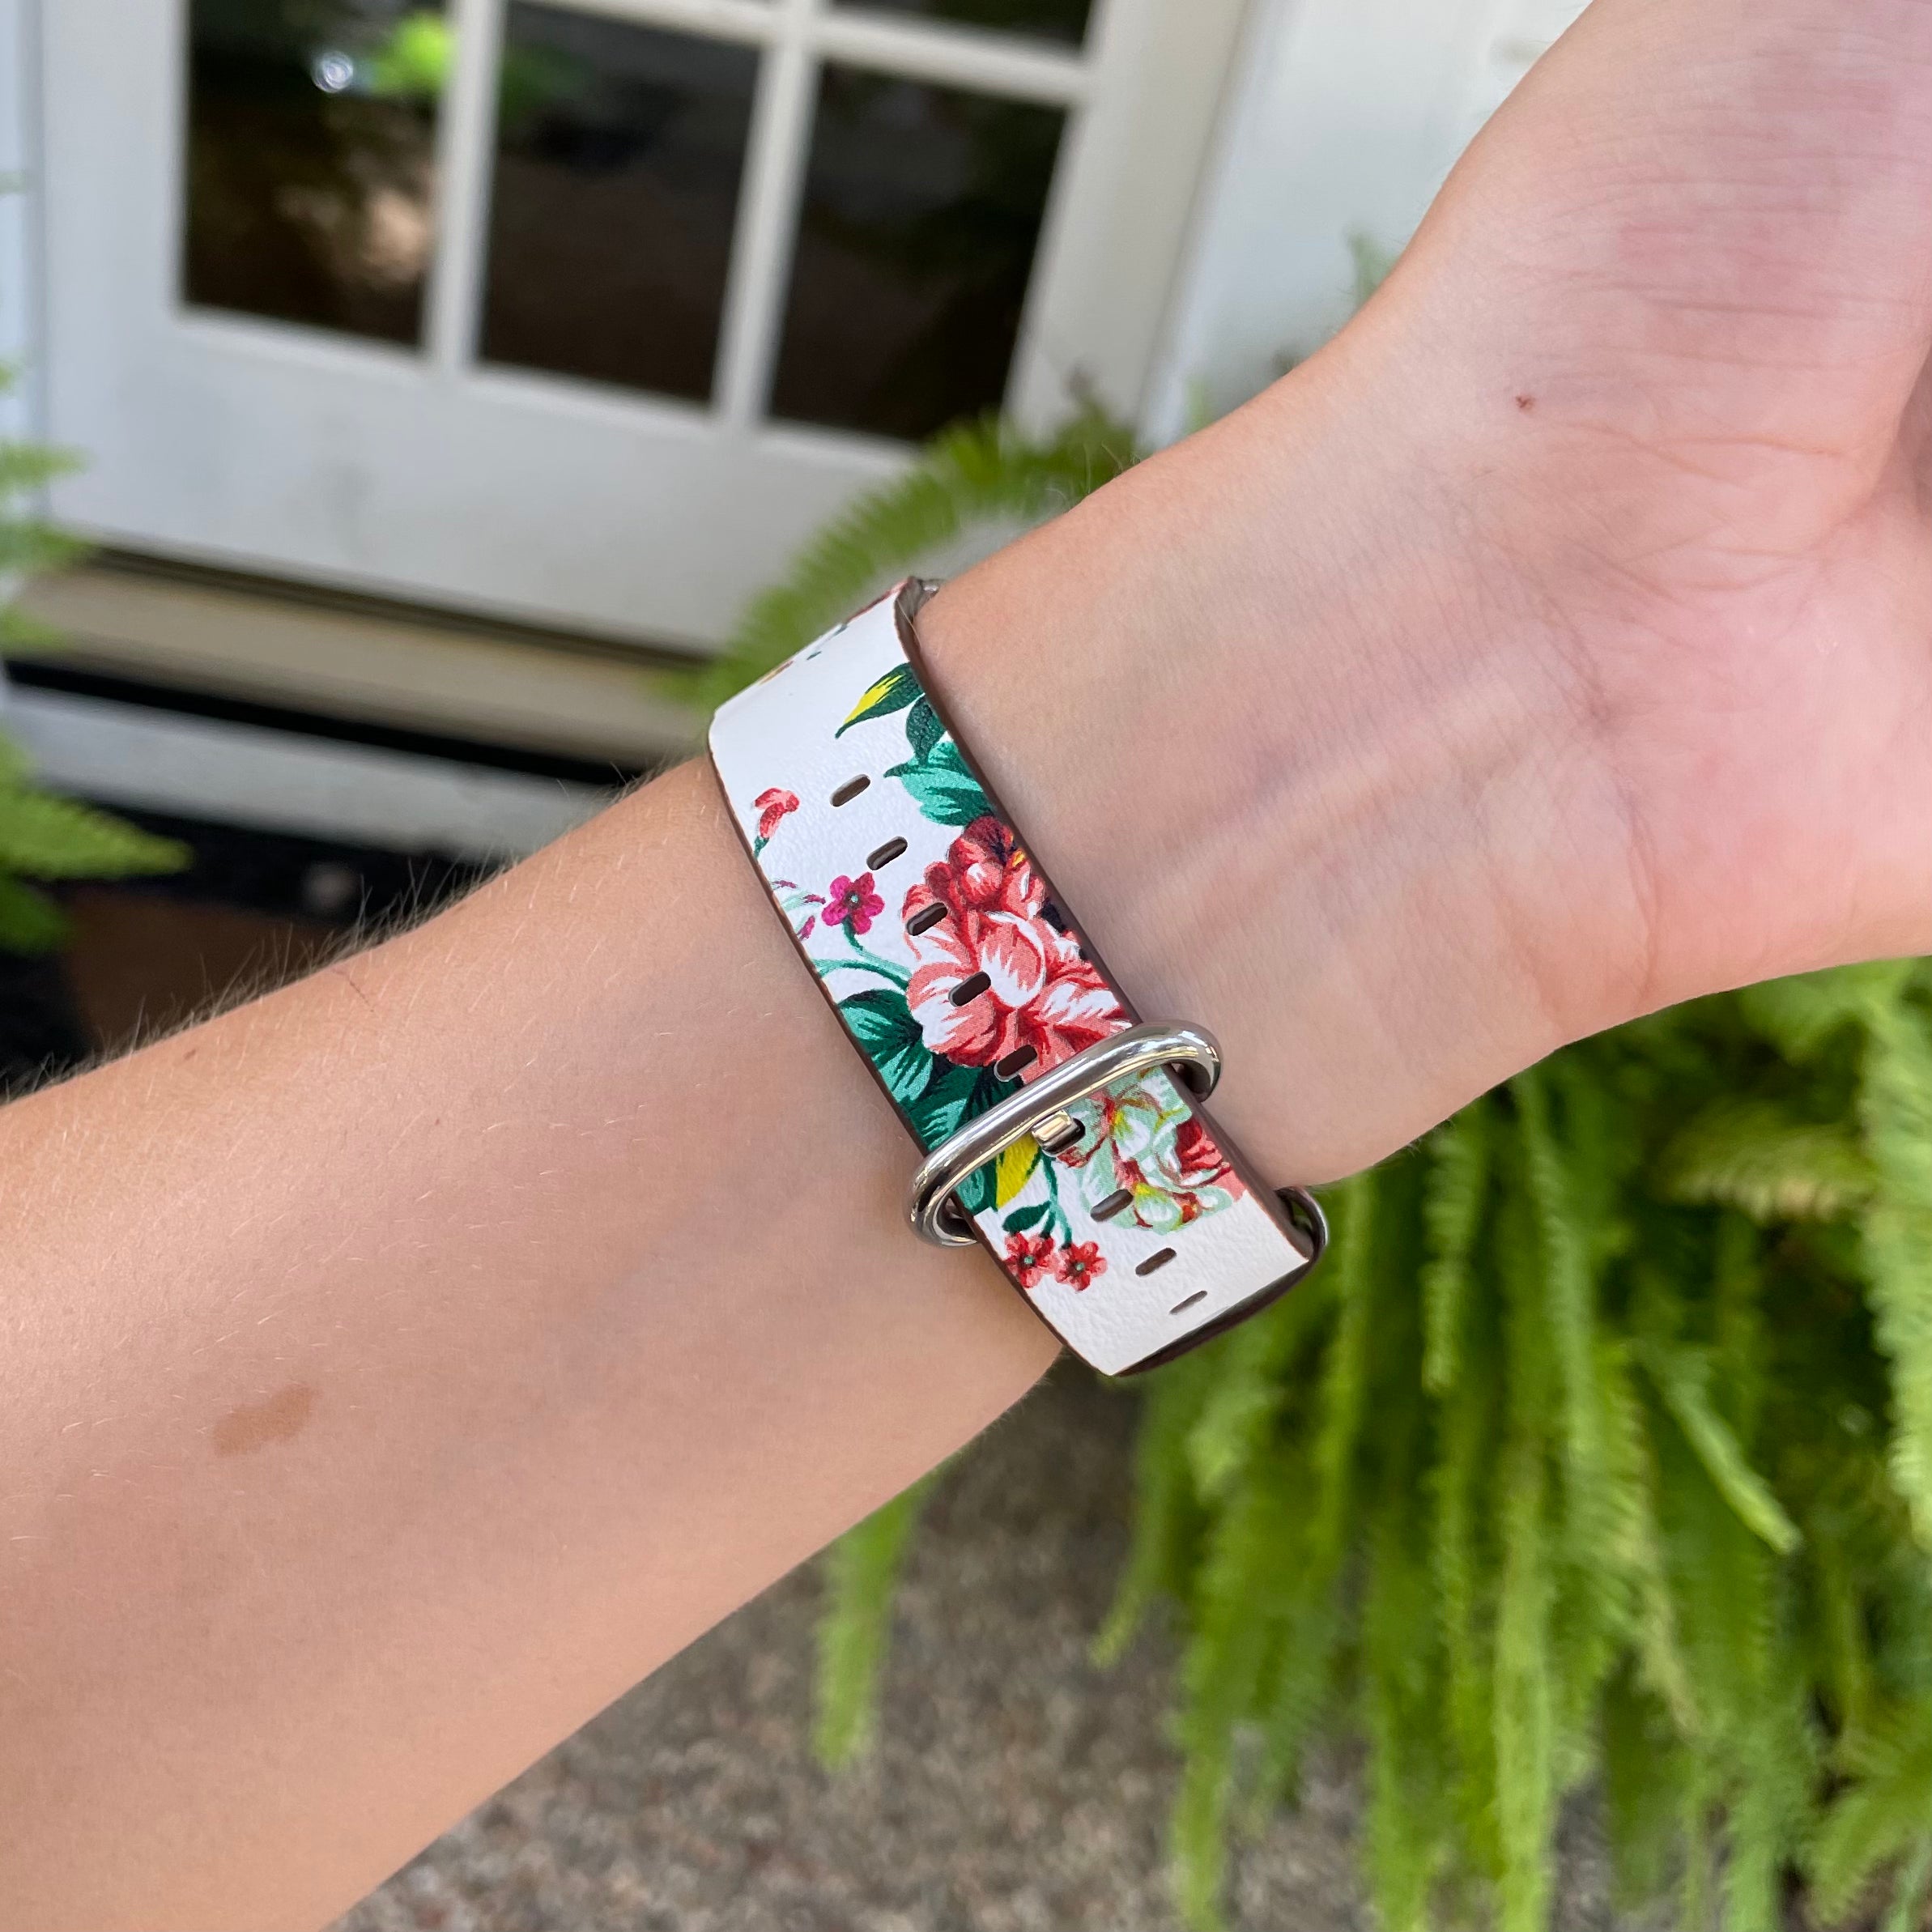 White Multi-Color Floral Print Apple Watch Band on Apple Watch on wrist.